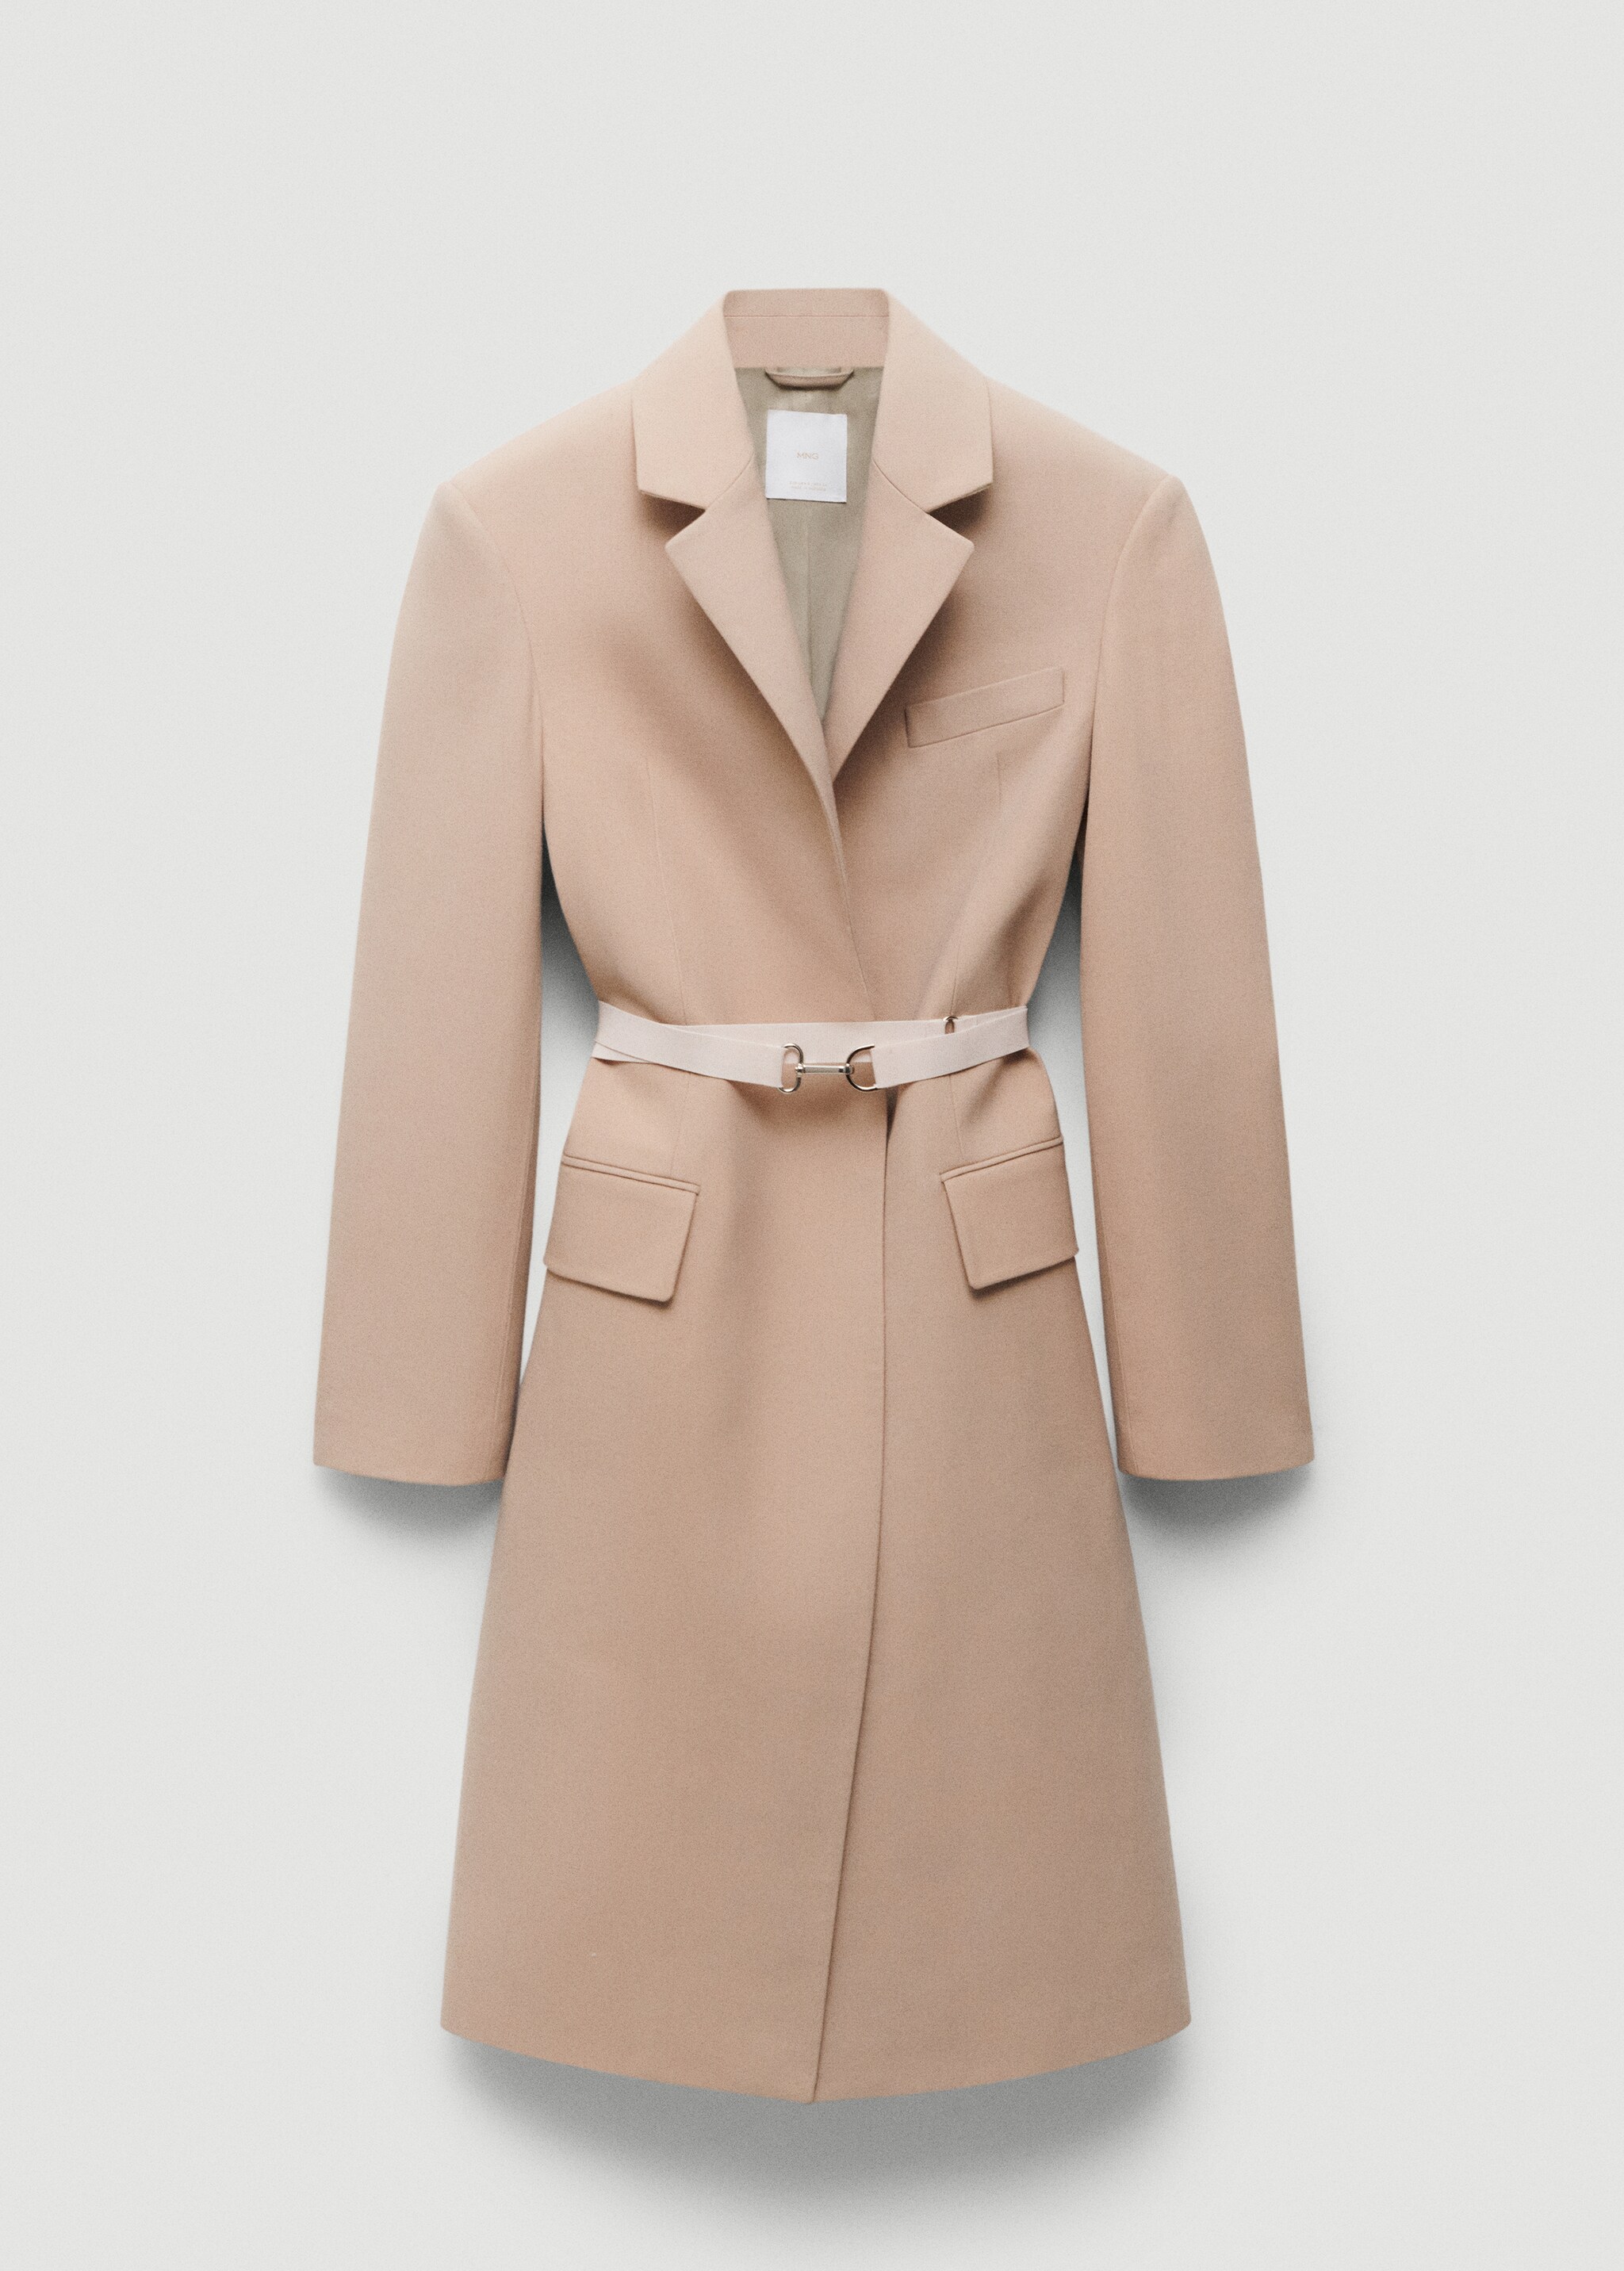 Structured double fabric coat with belt - Article without model